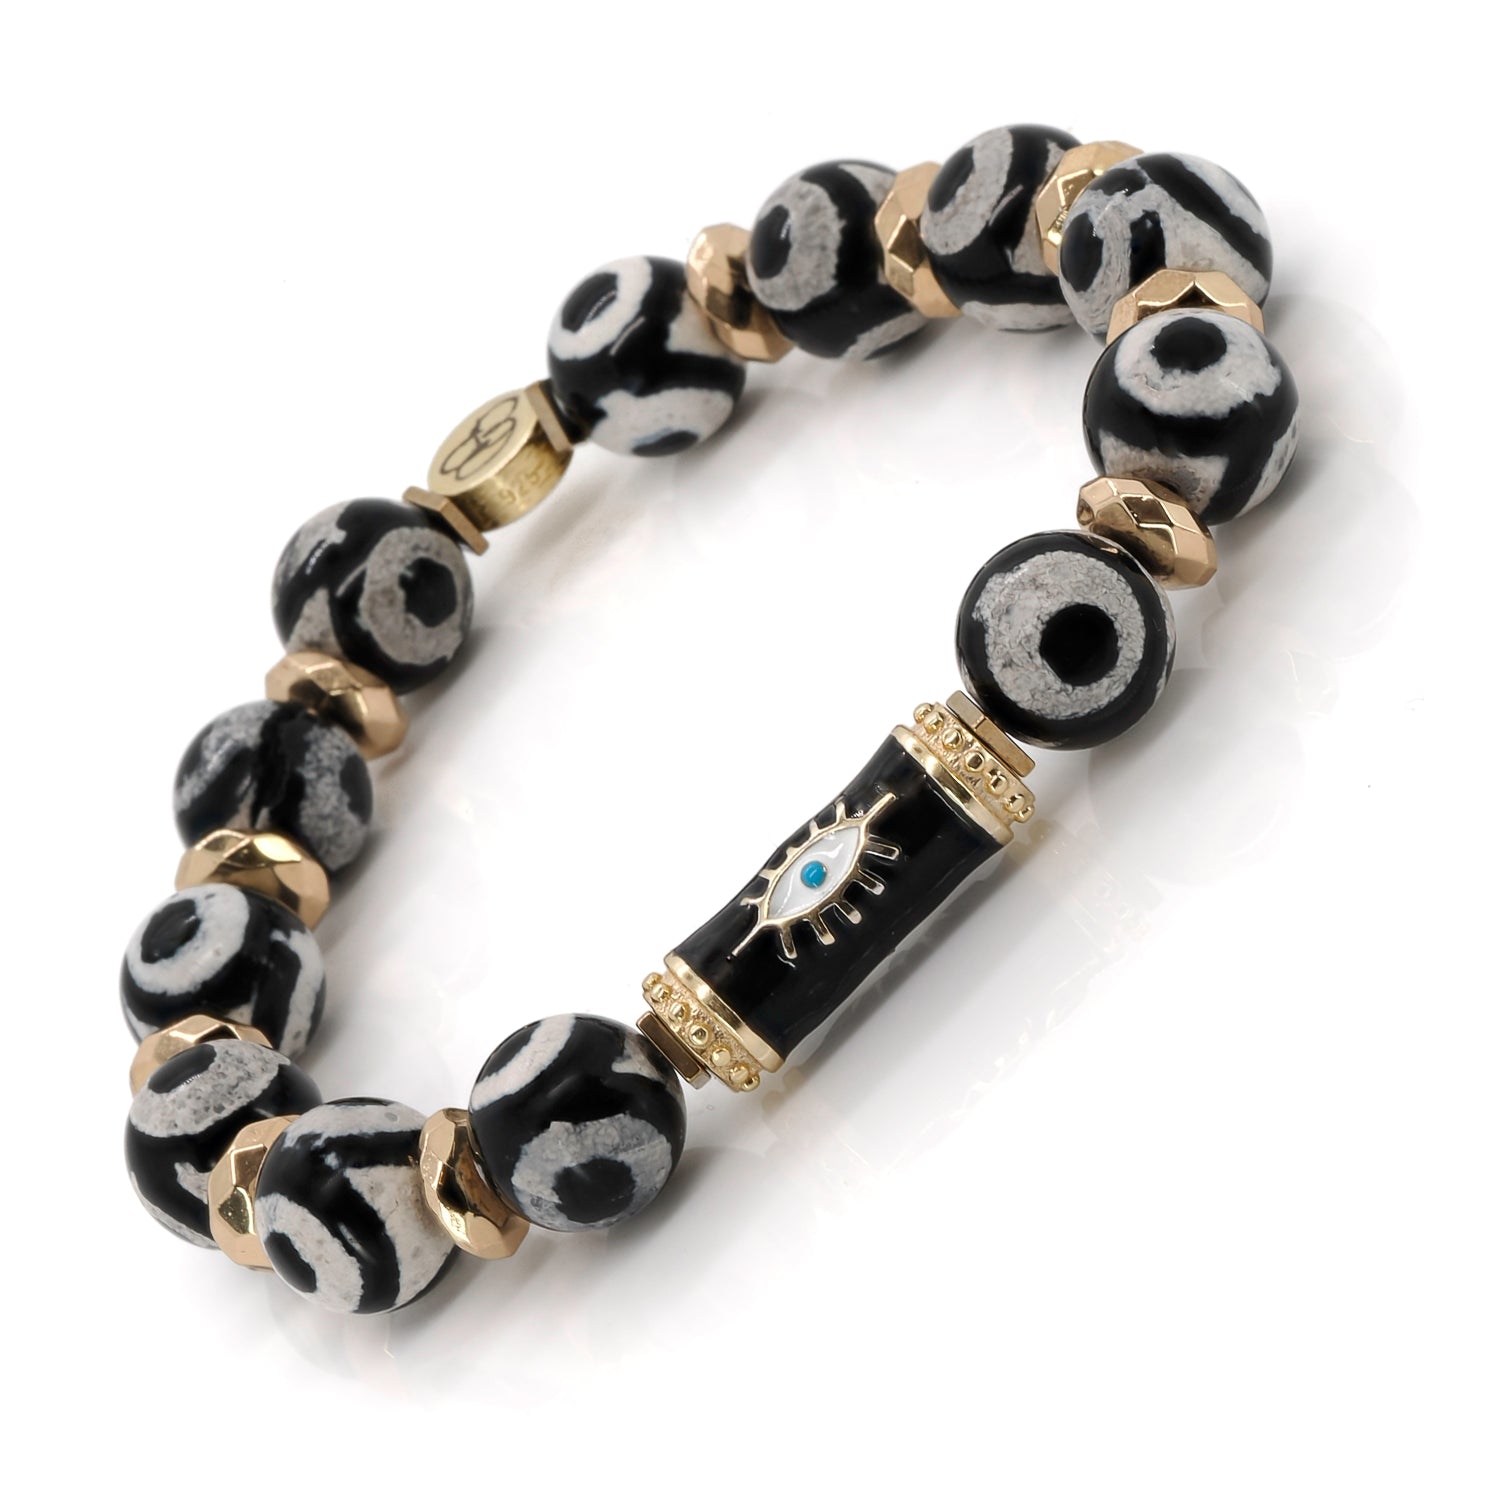 KarmaBeads for your #individual #style statement! Create your own look now!  | Thomas sabo bracelet, Karma jewelry, Jewelry